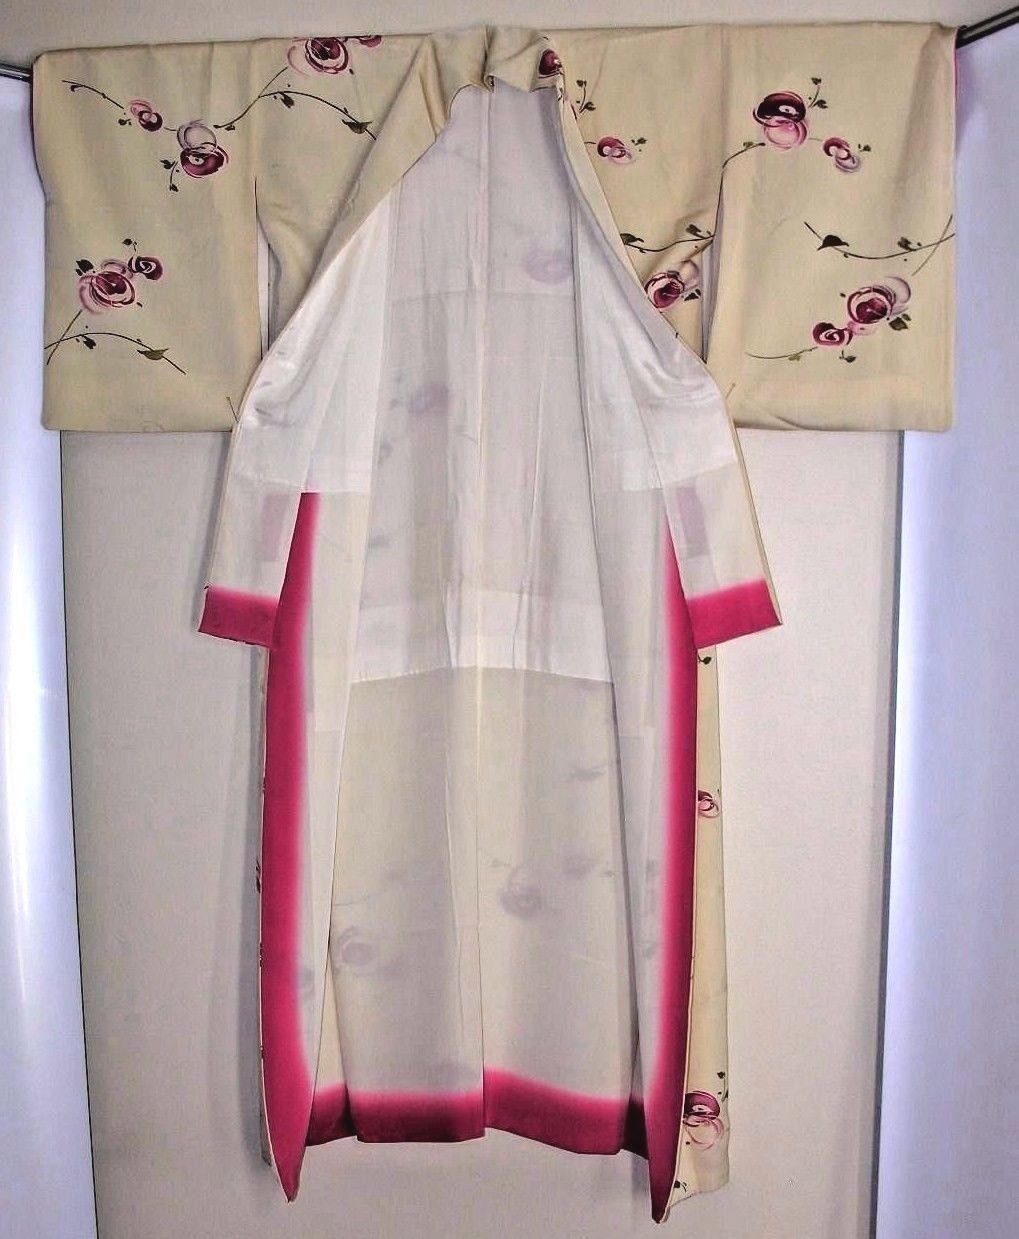 Vintage Woman's Kimono with Swirly Roses Pattern and Ombre-Dyed 